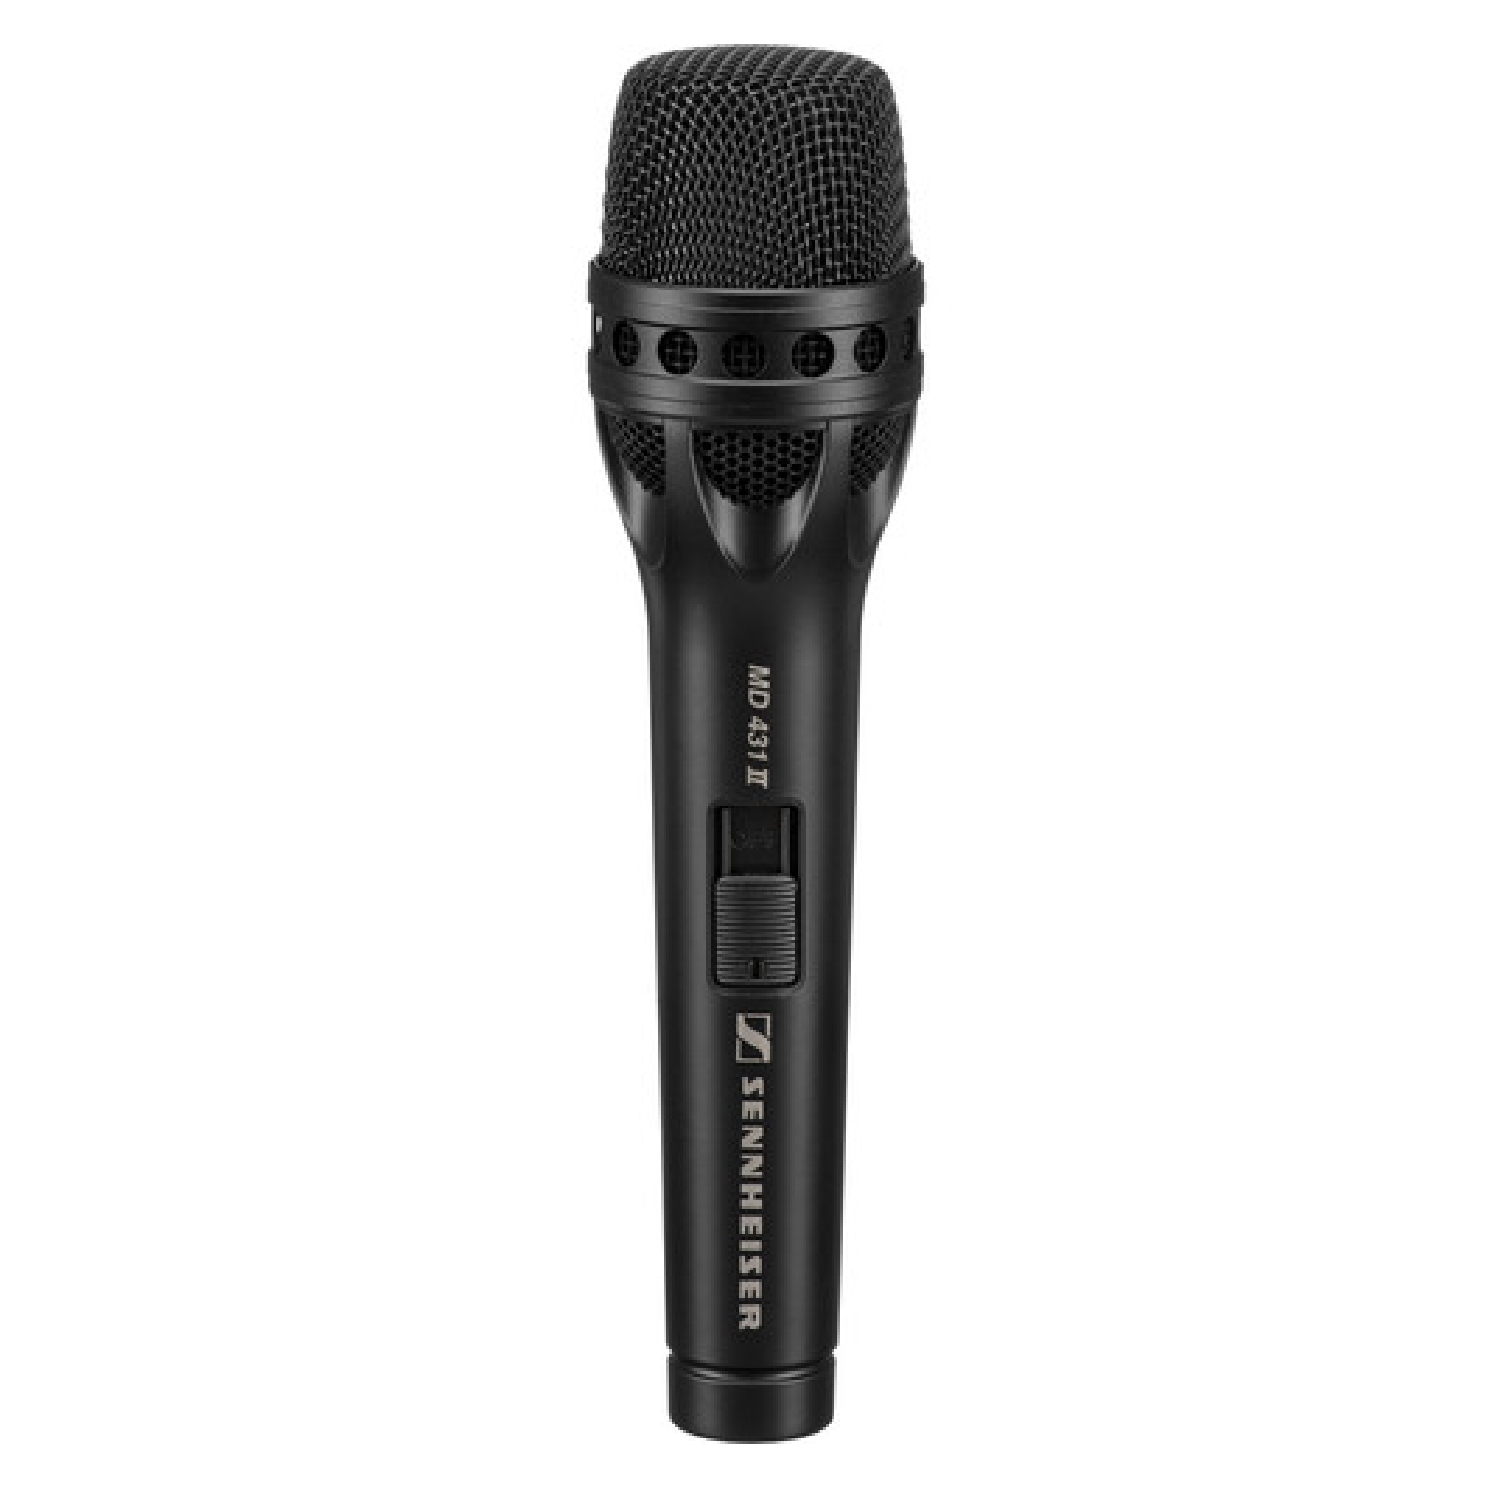 Handheld Supercardioid Dynamic Microphone with On/Off Switch   MD 431 II sennheiser